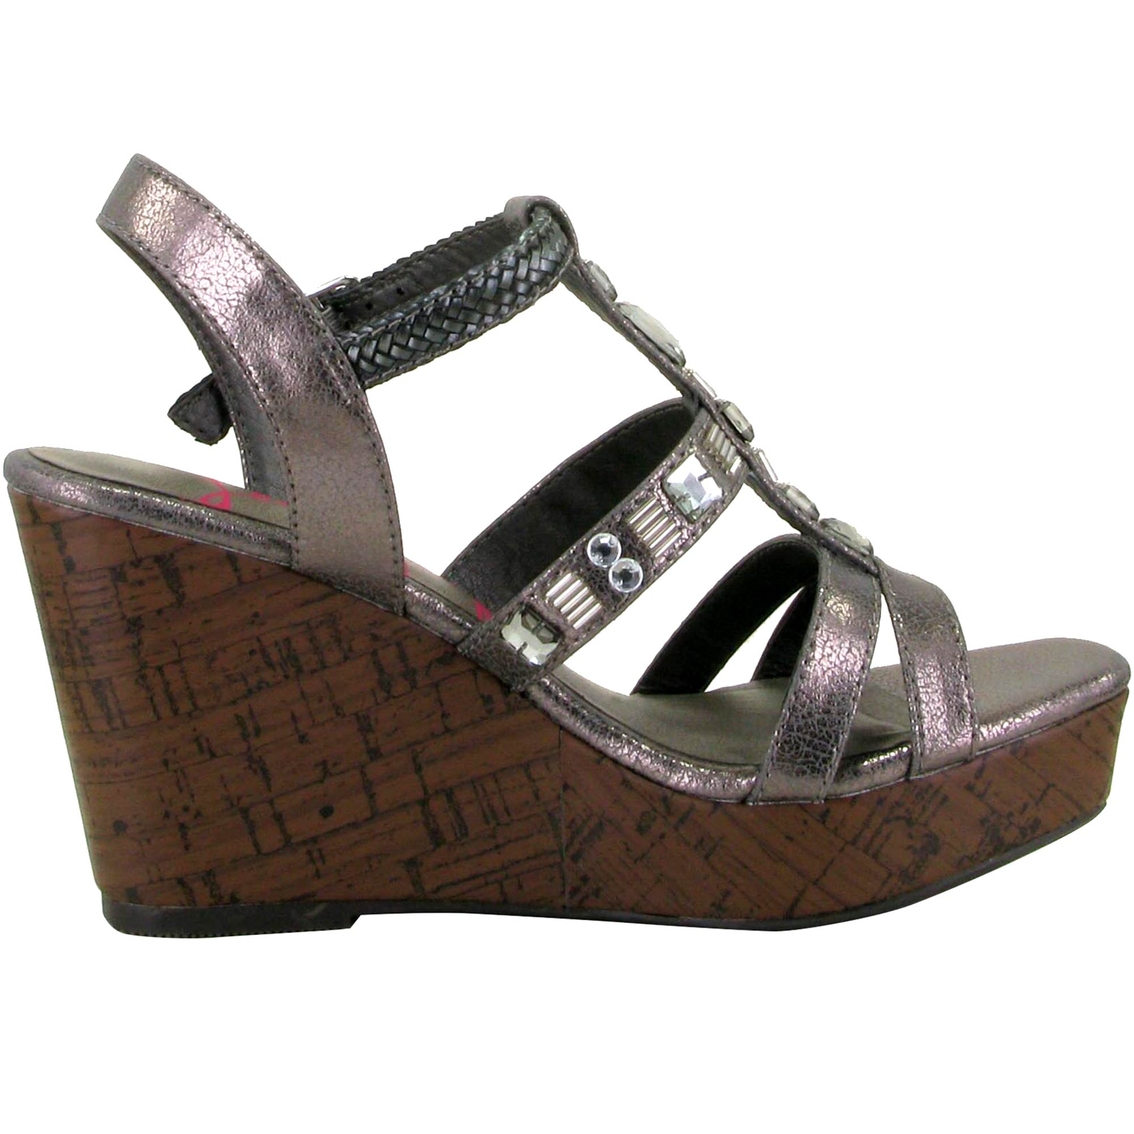 Jellypop Rumi T Strap Wedge Sandals - Image 3 of 5